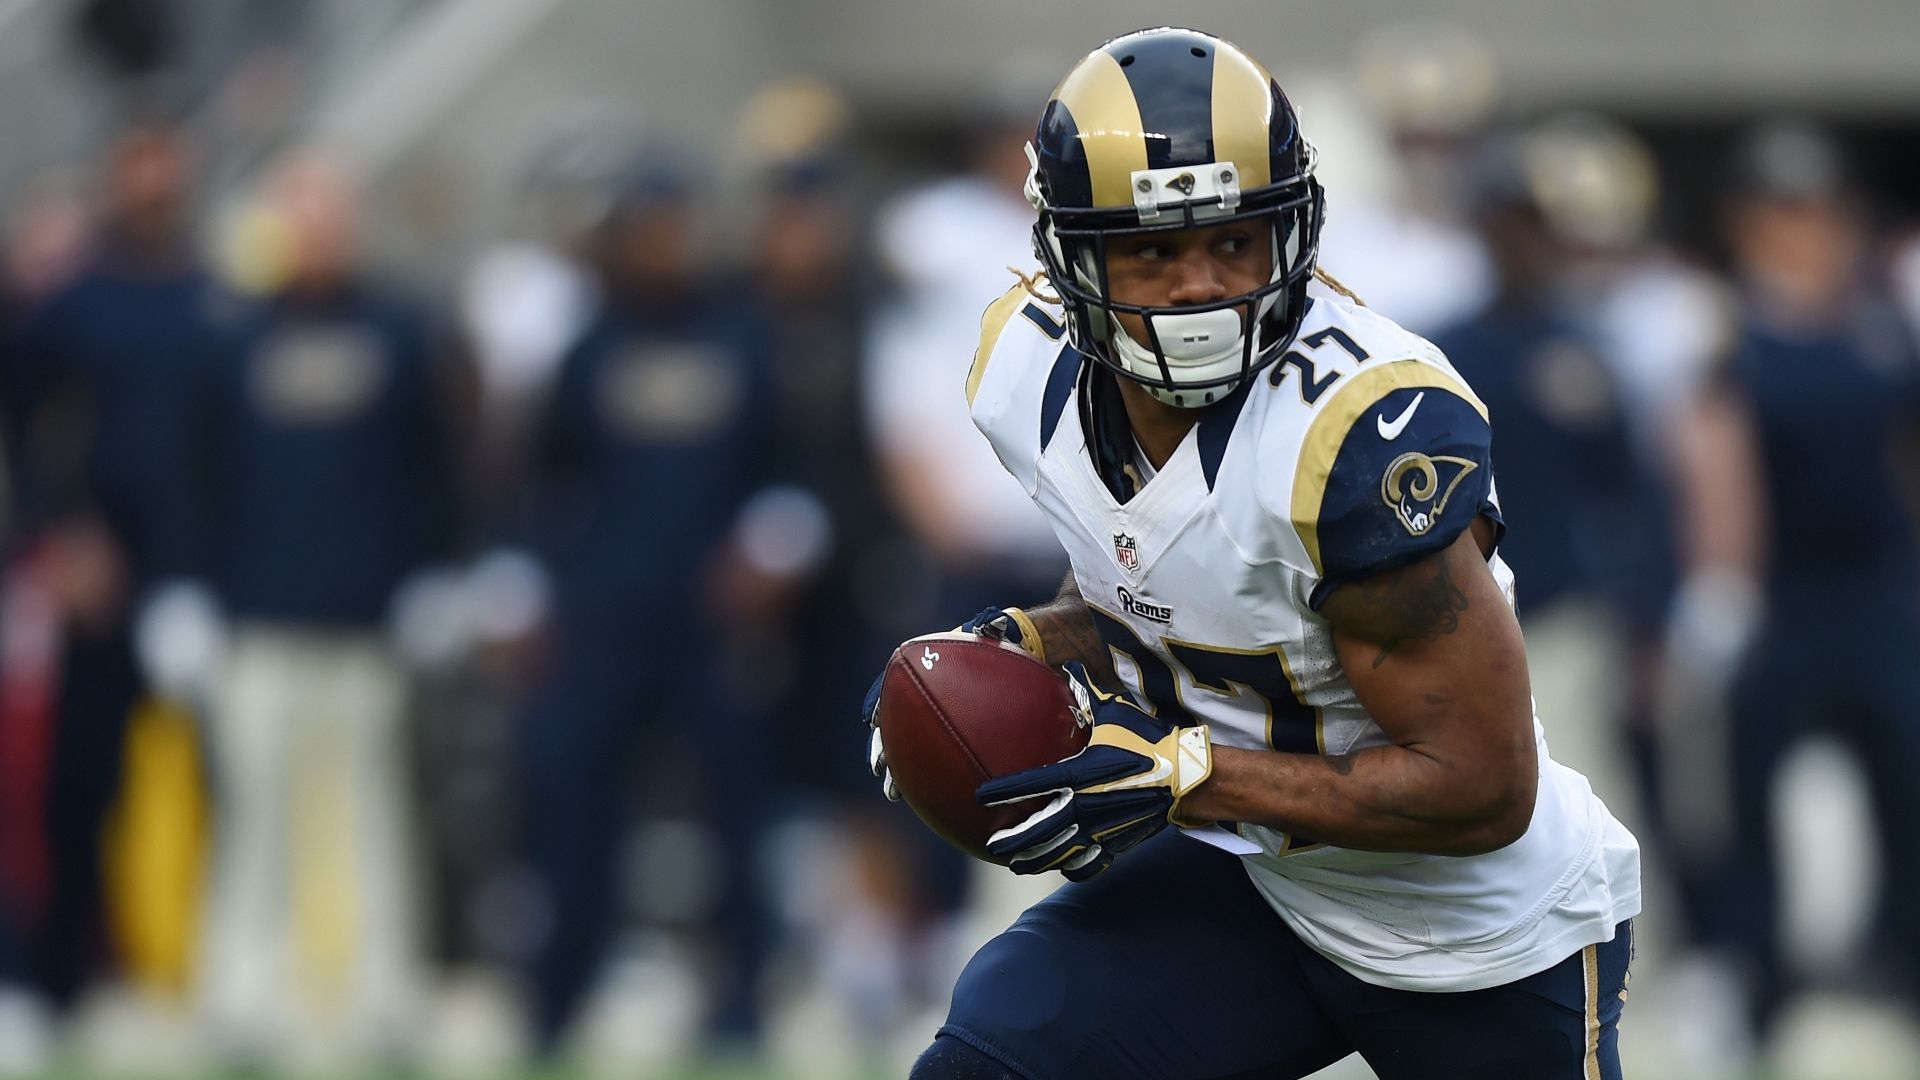 Mason's future with Rams in doubt after arrest?